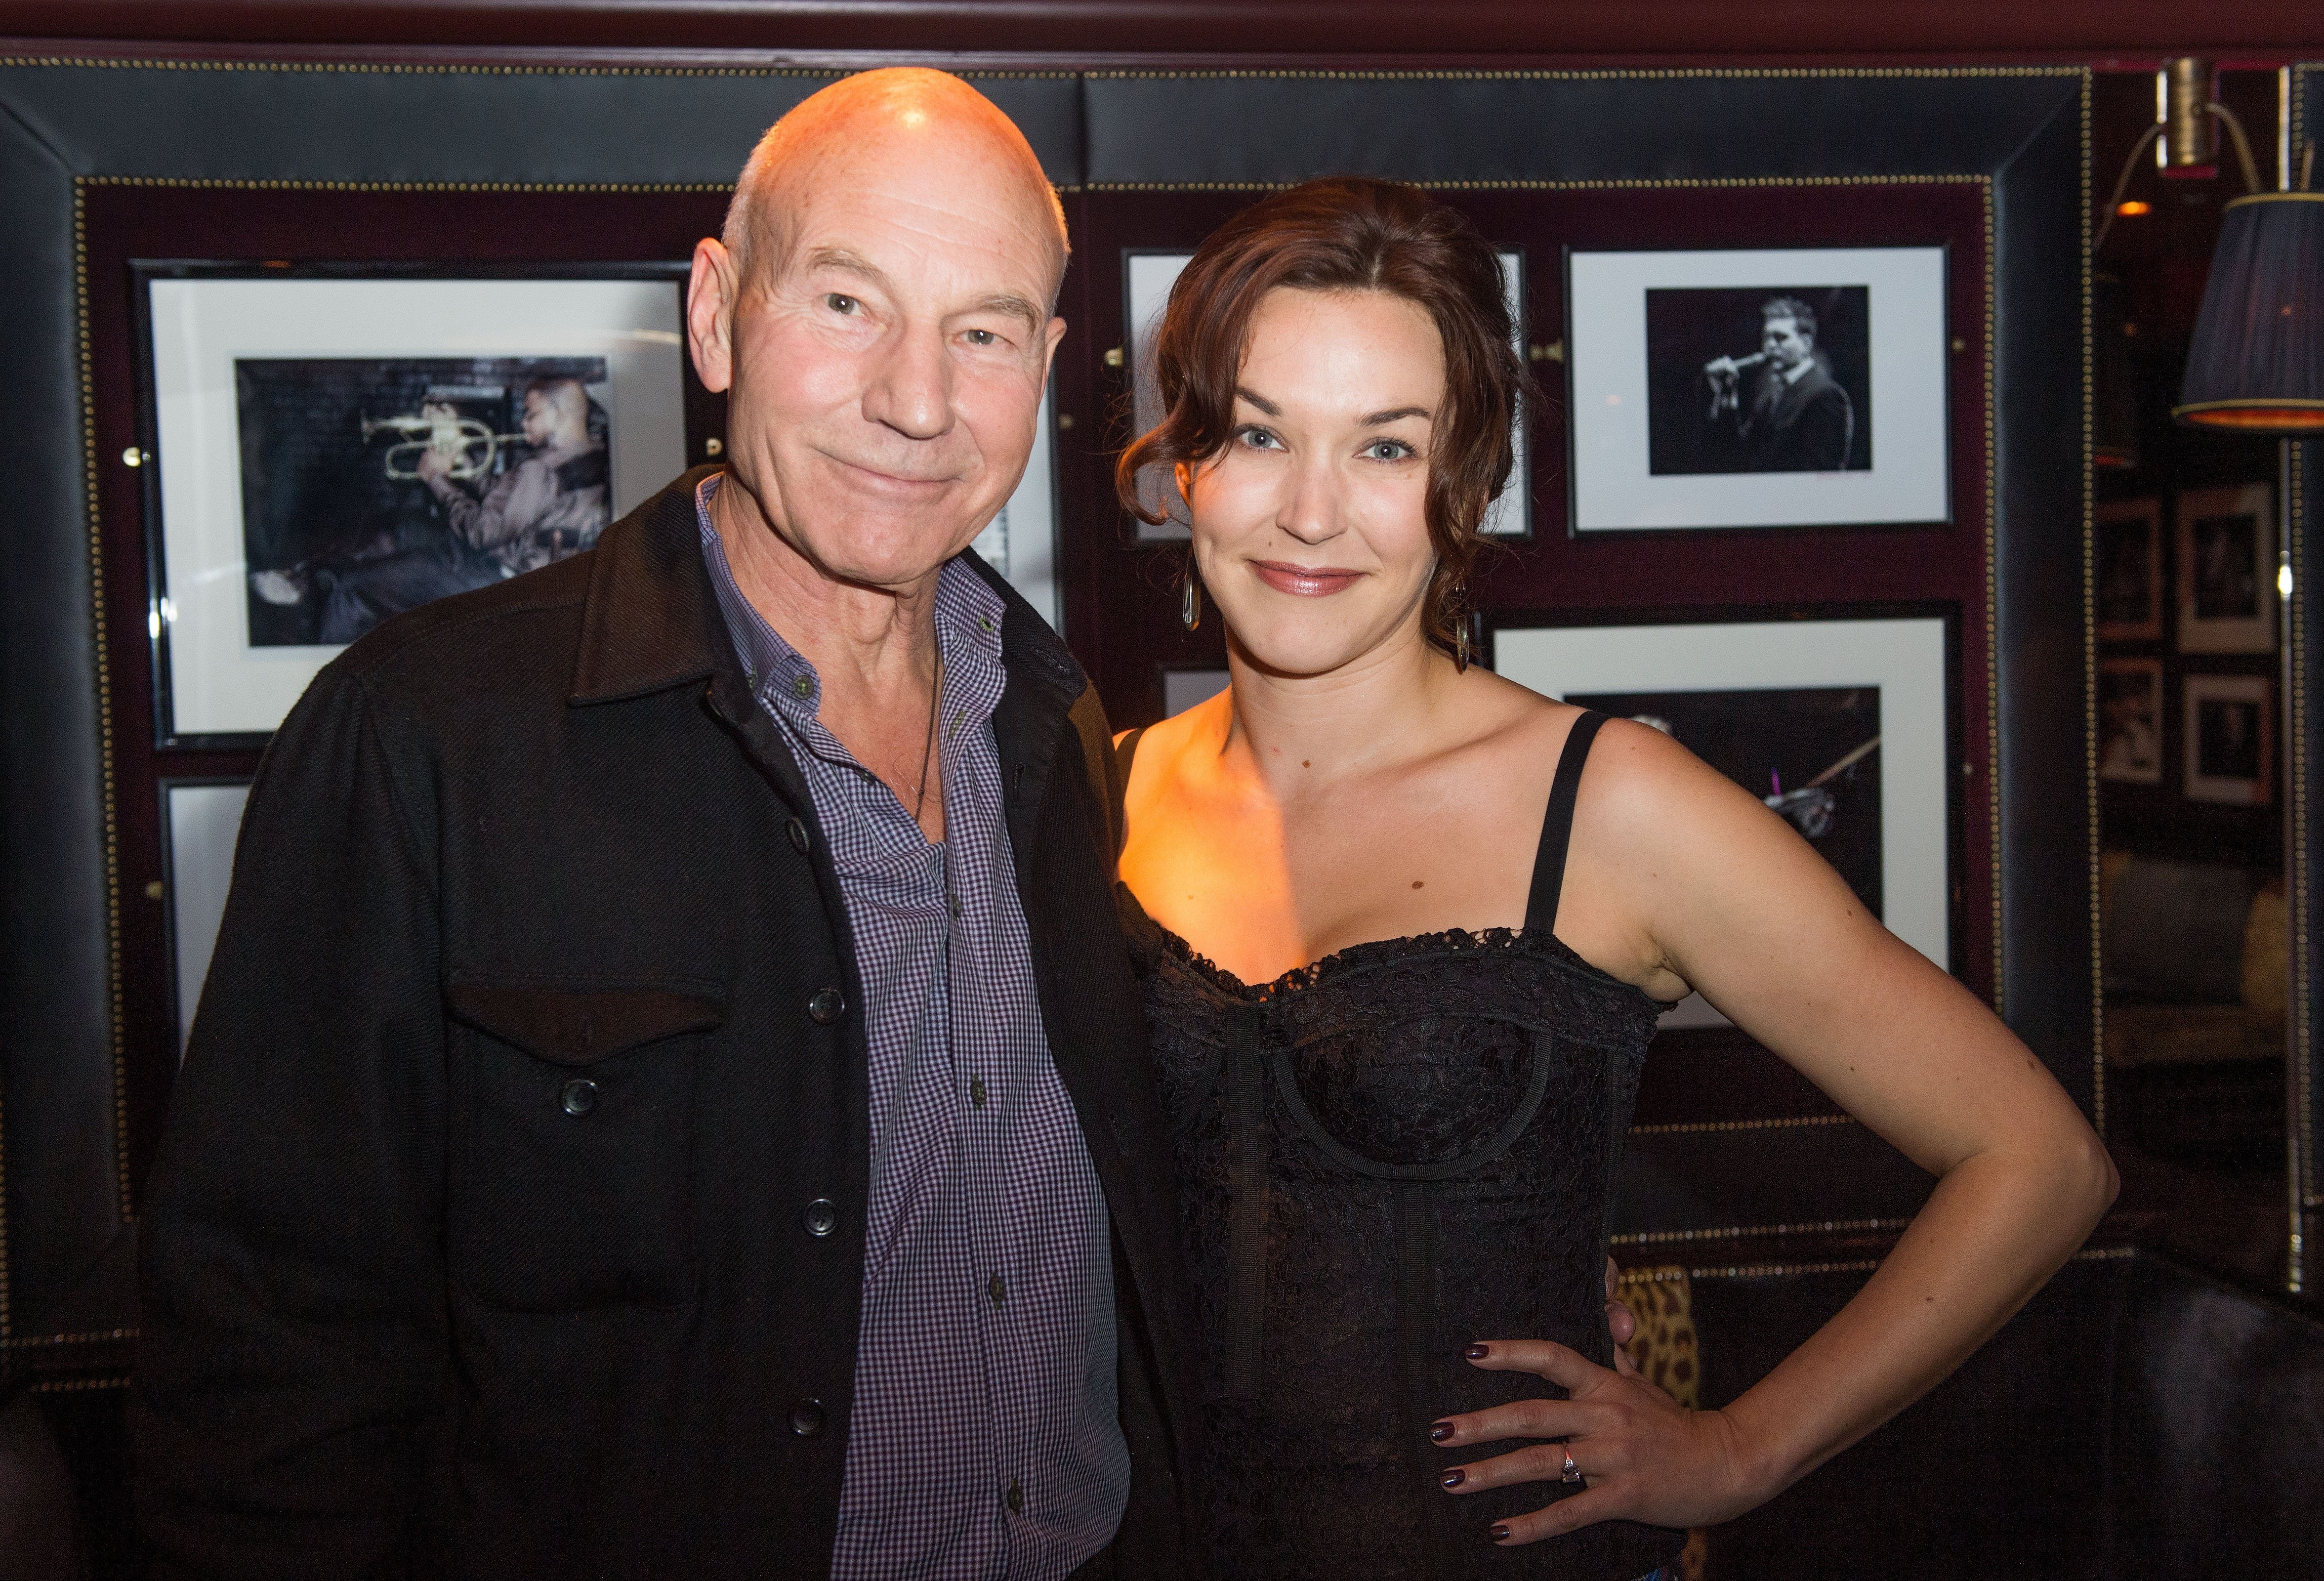 Sunny Ozell and Sir Patrick Stewart at Ronnie Scott's Jazz Club on October 17, 2012 in London, England | Source: Getty Images